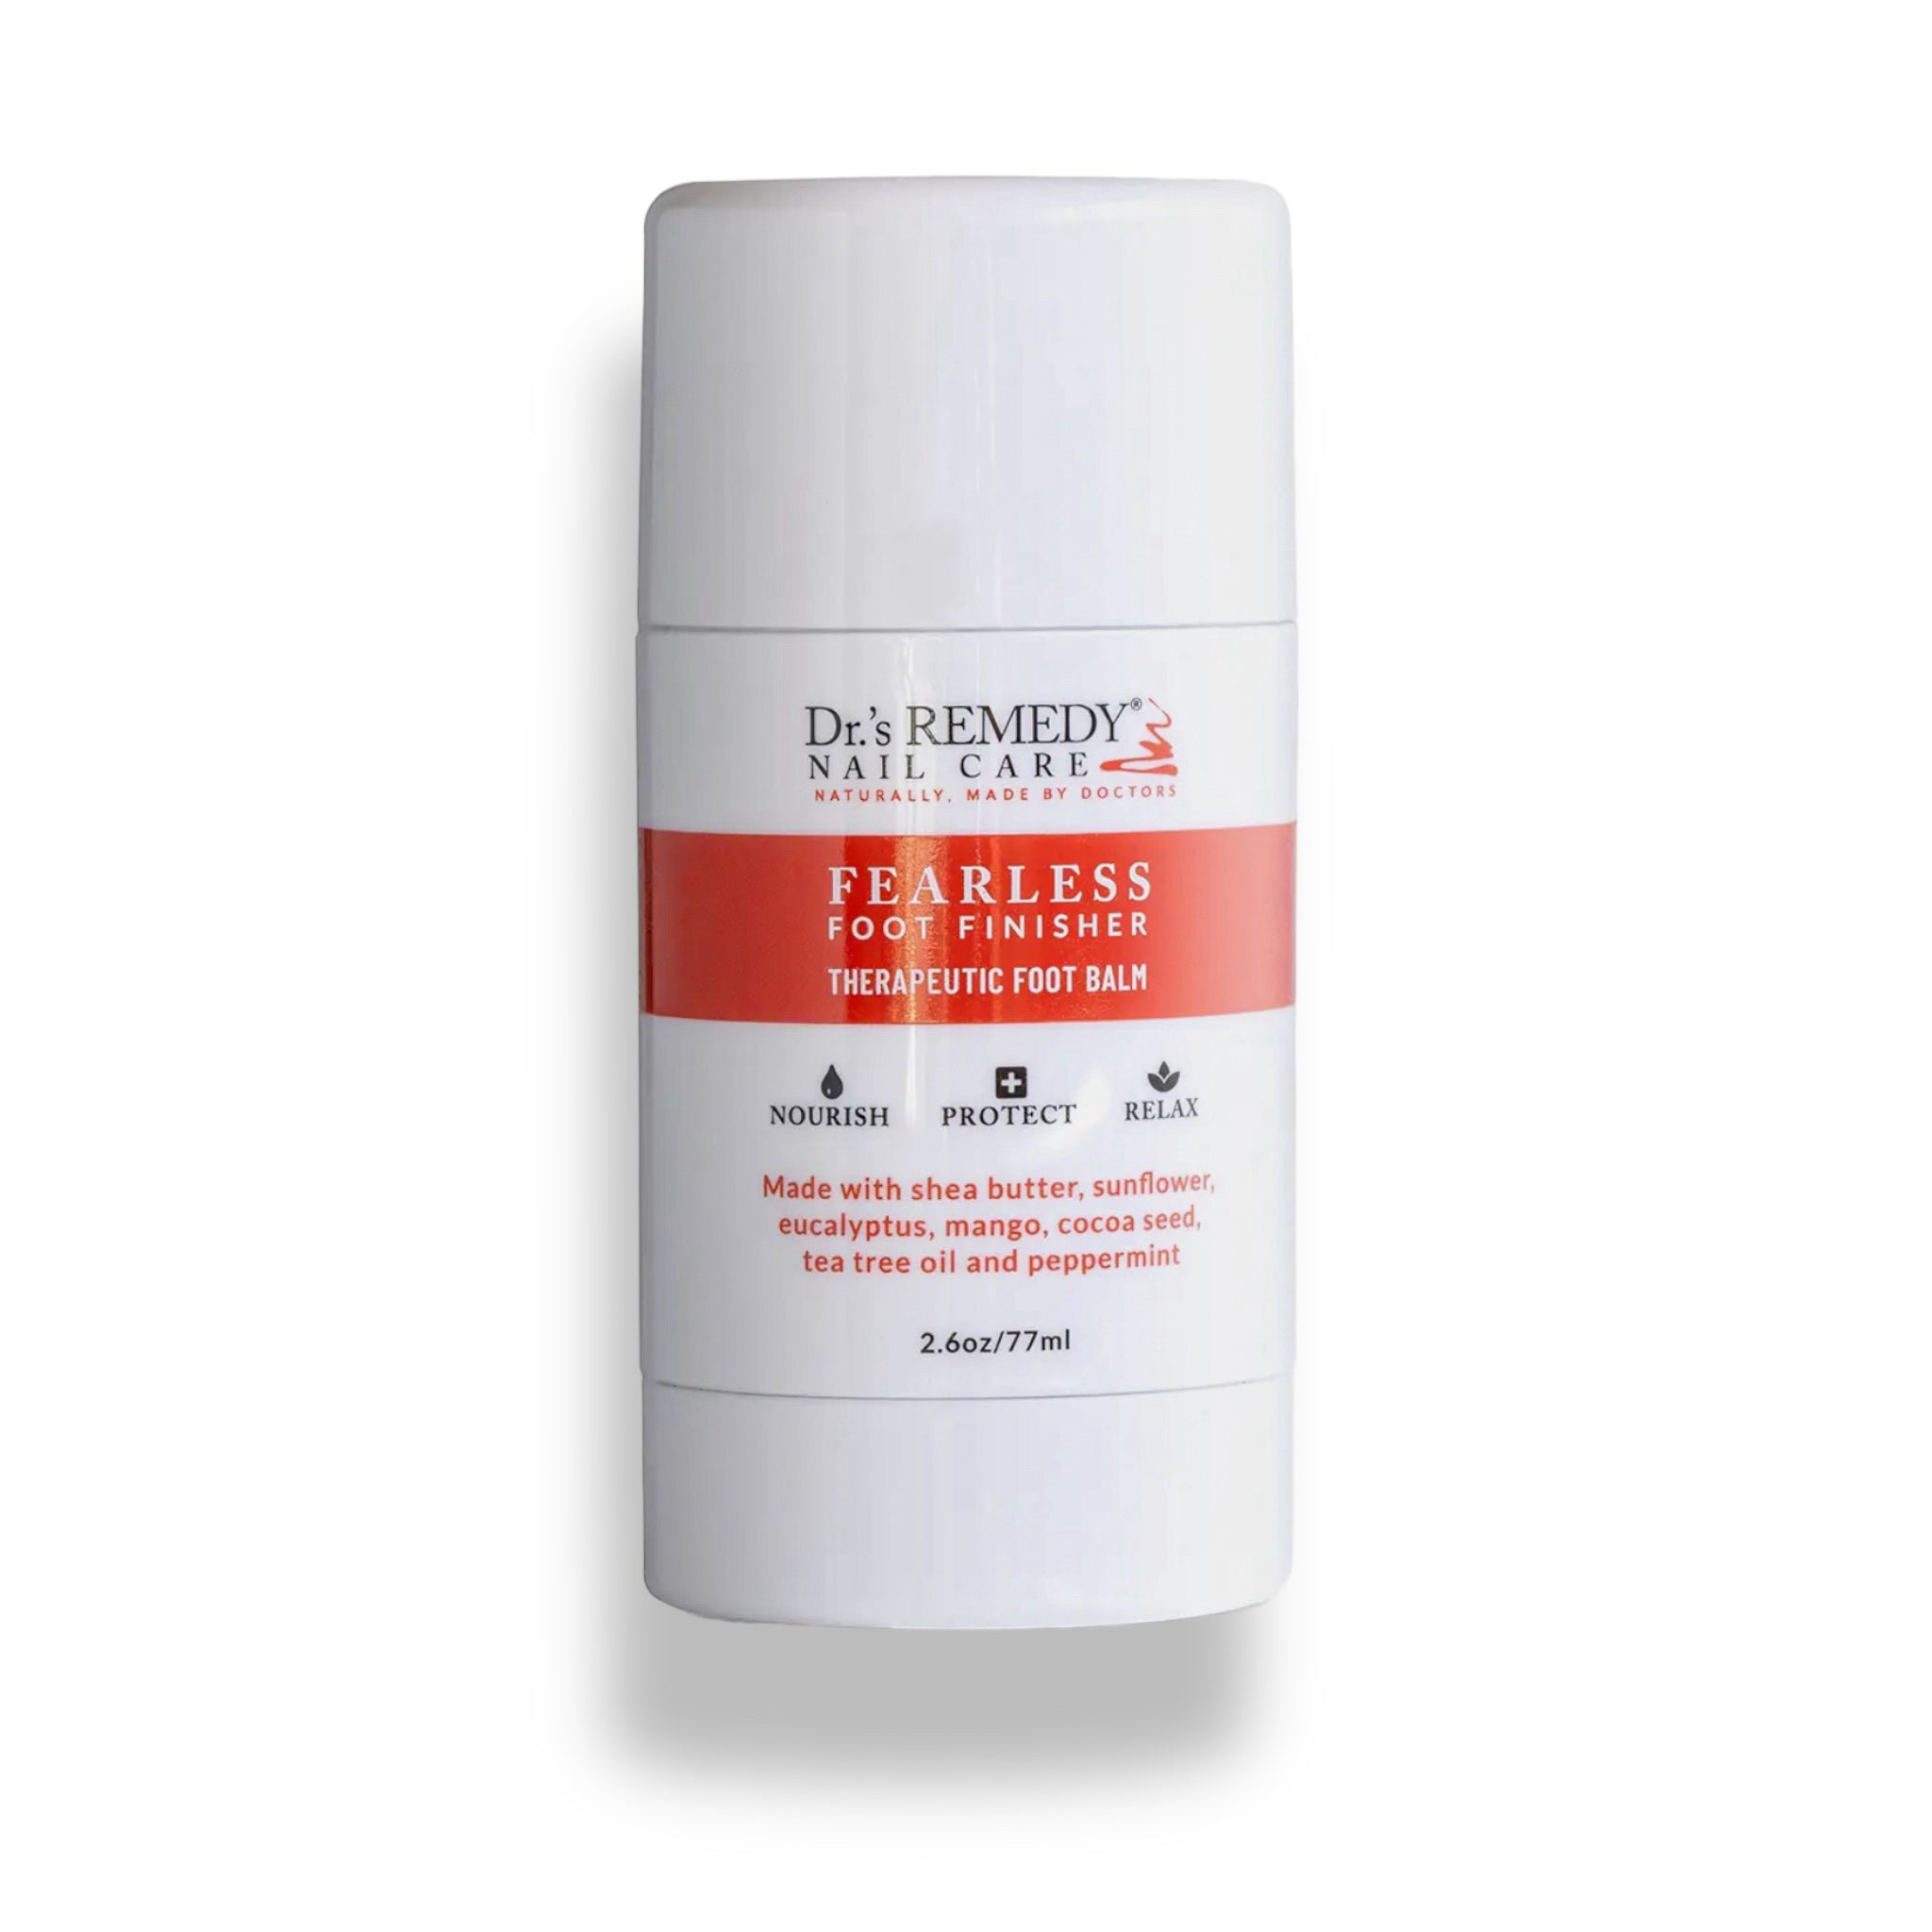 Dr Remedy's FEARLESS Foot Finisher Therapy Balm 